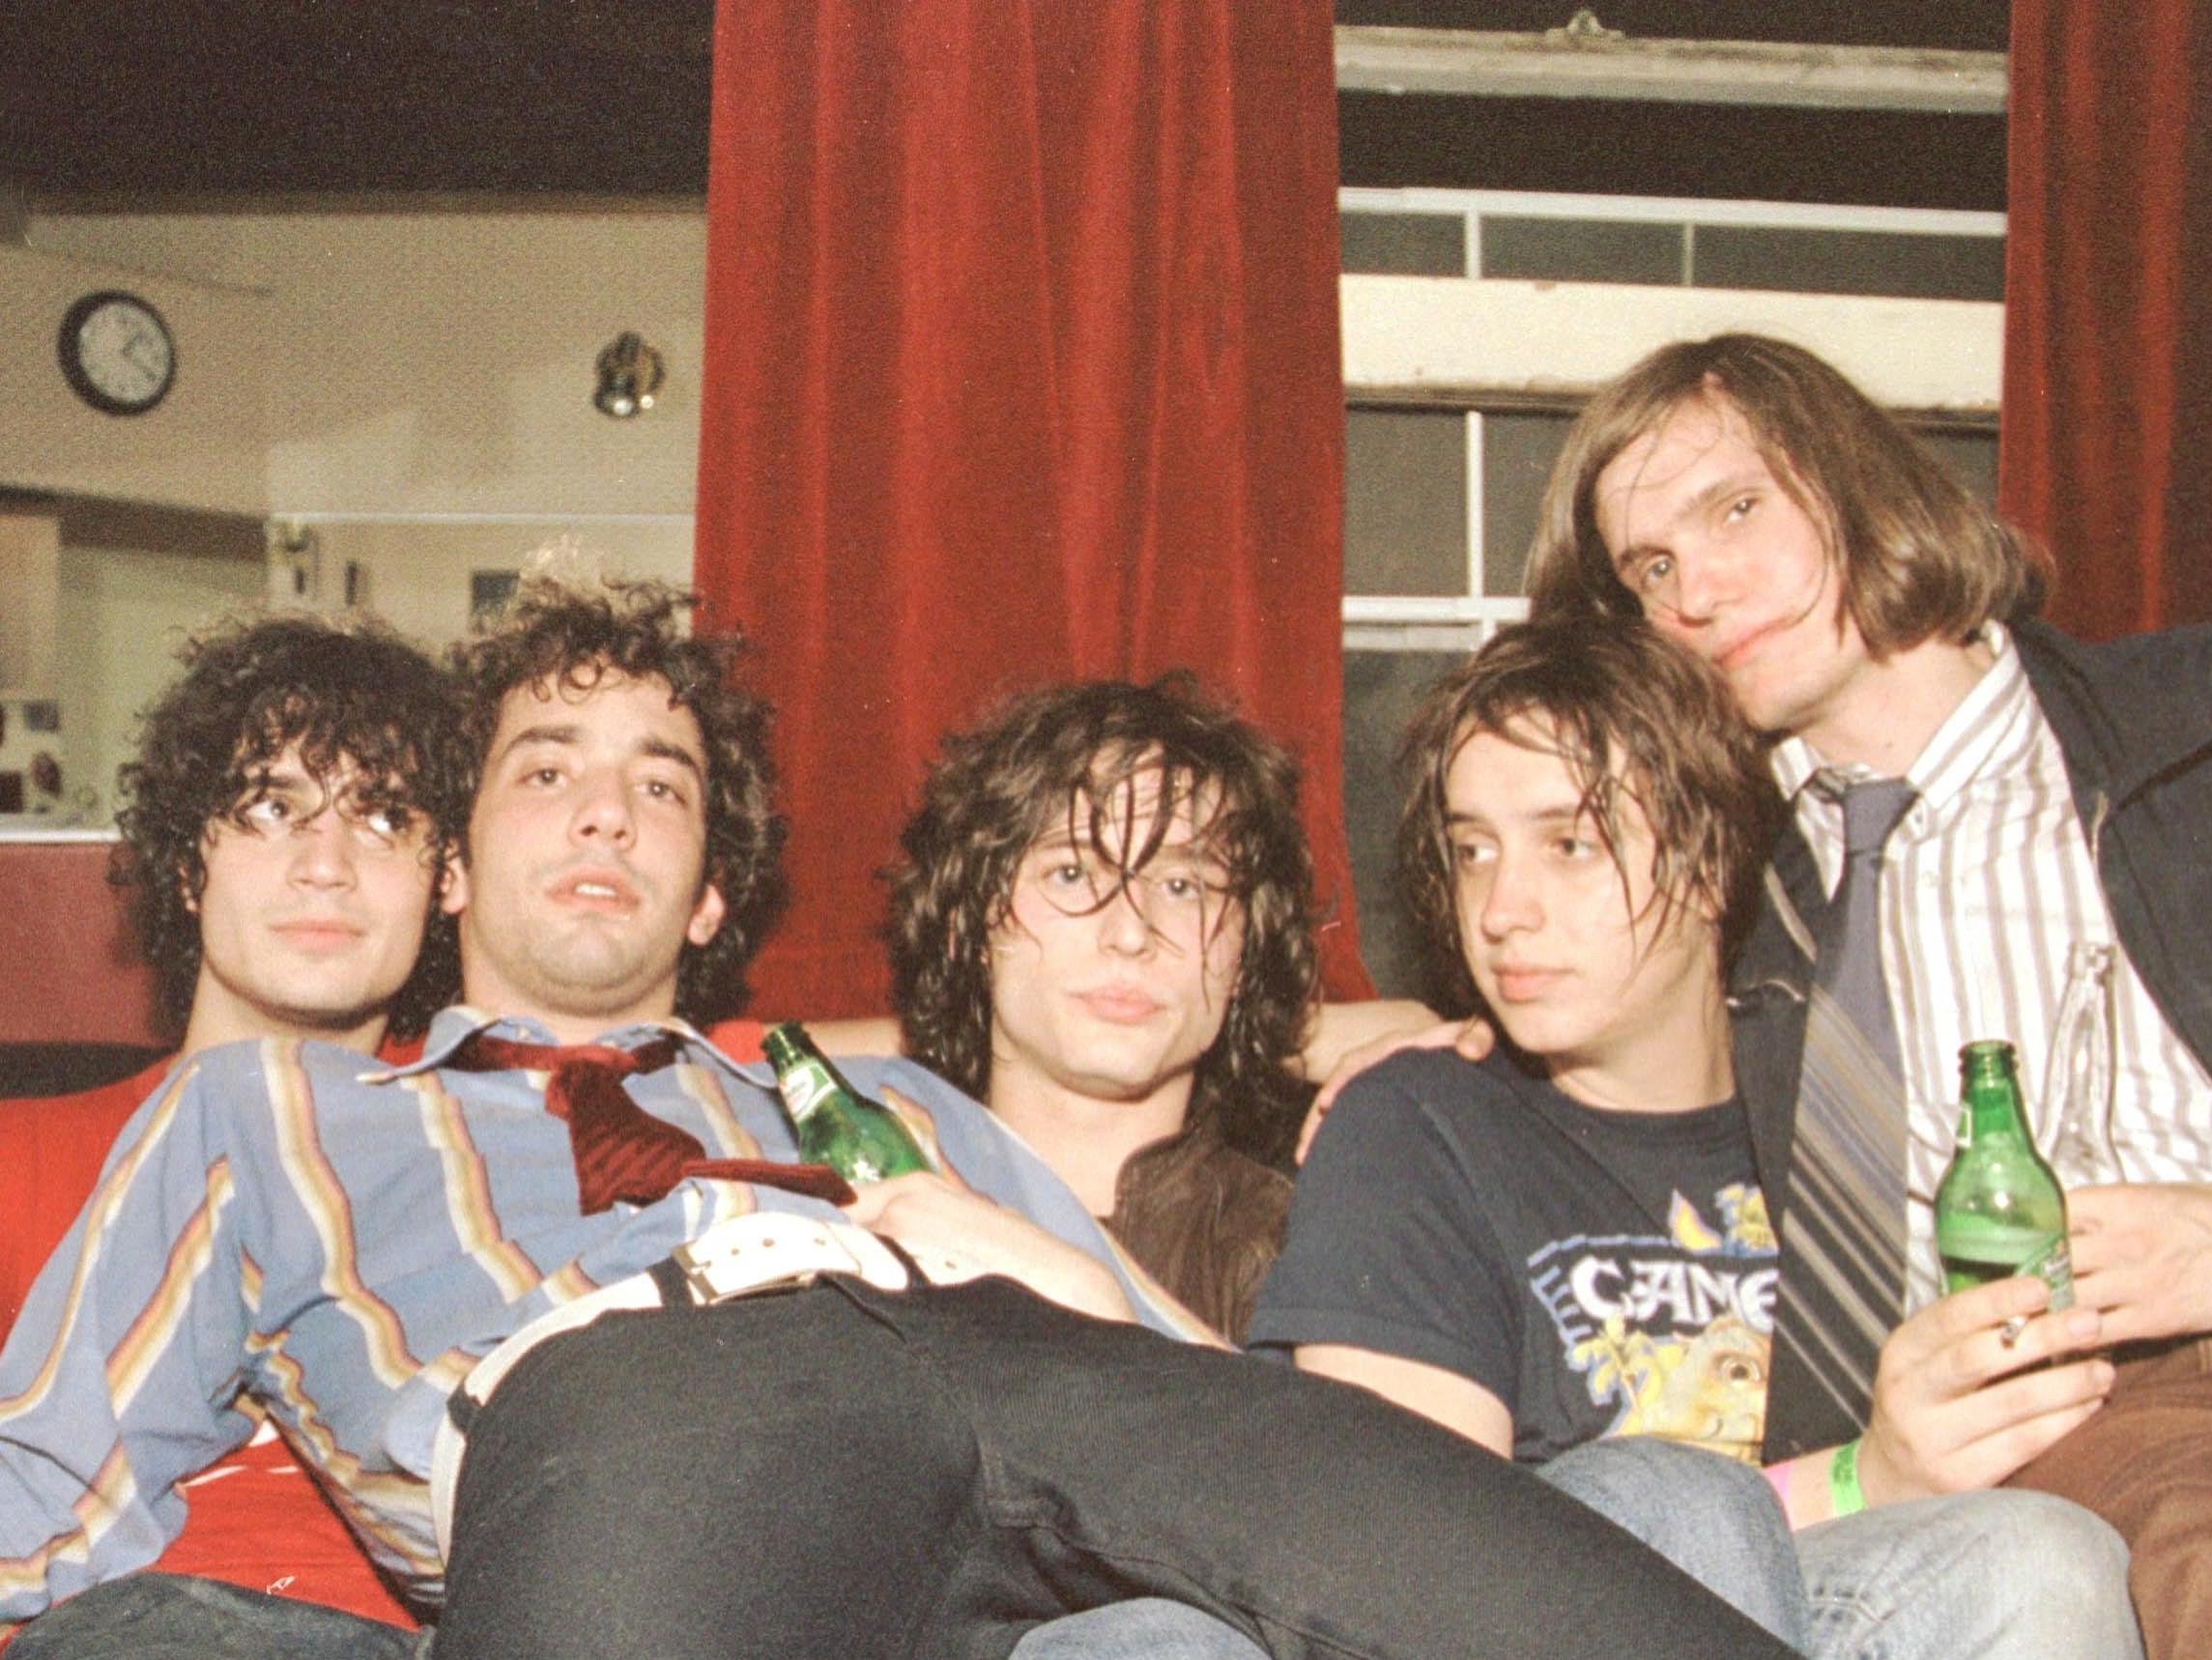 The Strokes - You Only Live Once (Alternate Version - Official HD